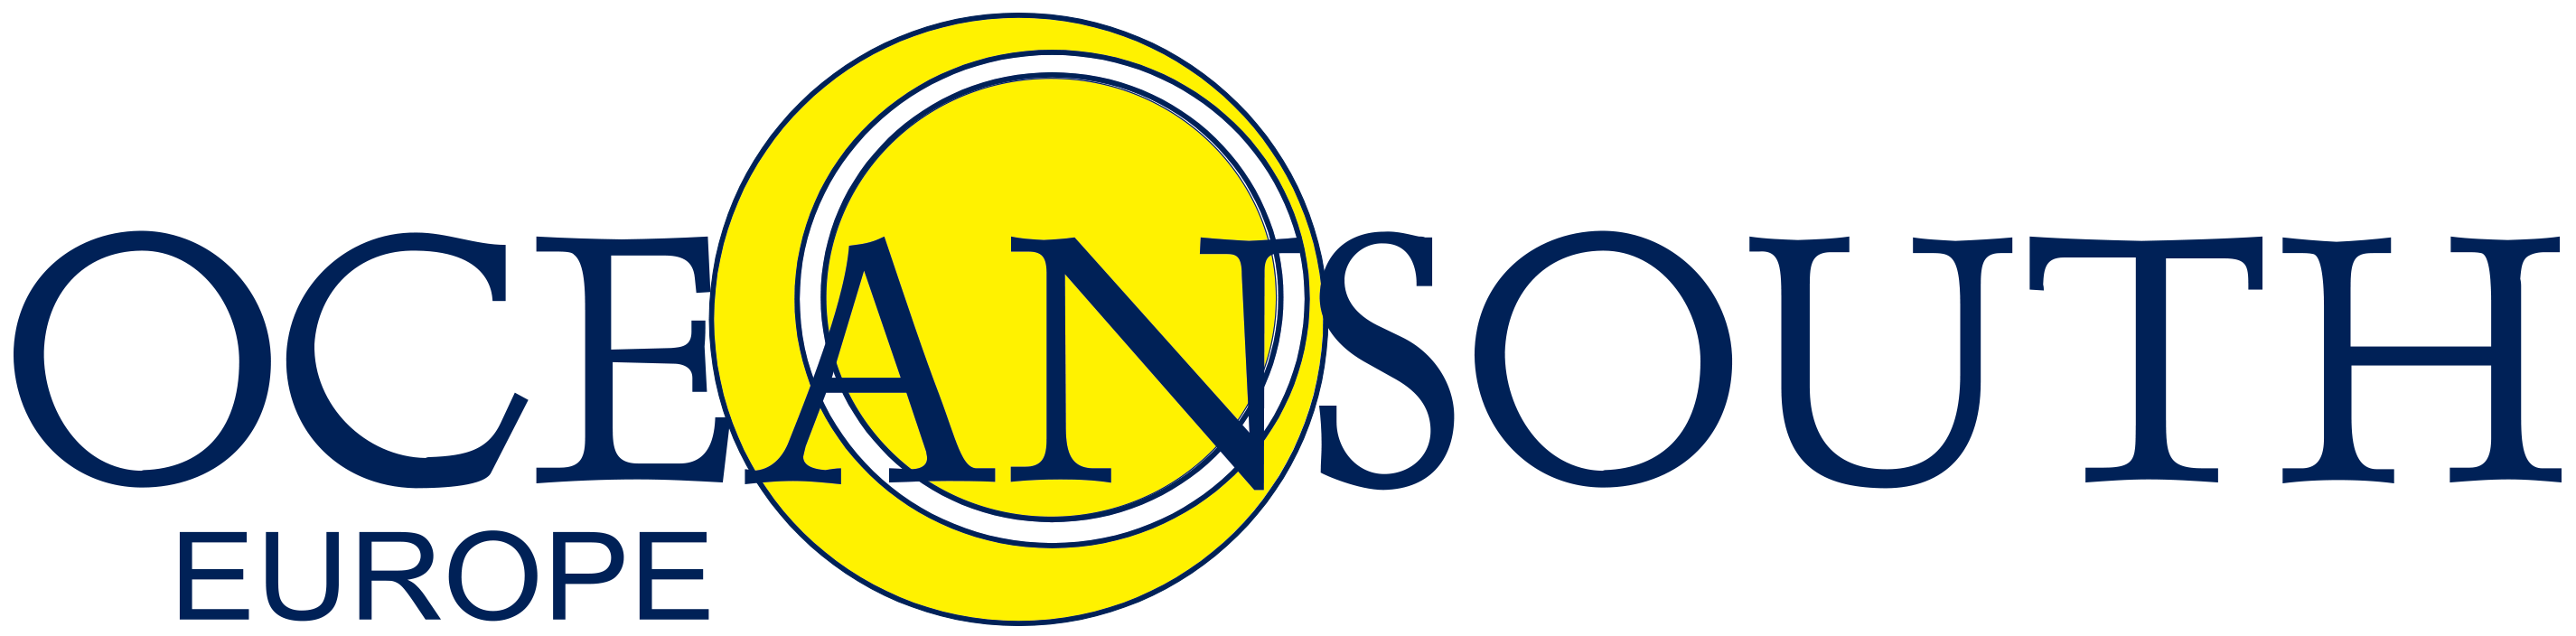 cropped-Logo-oceansouth-europe.png